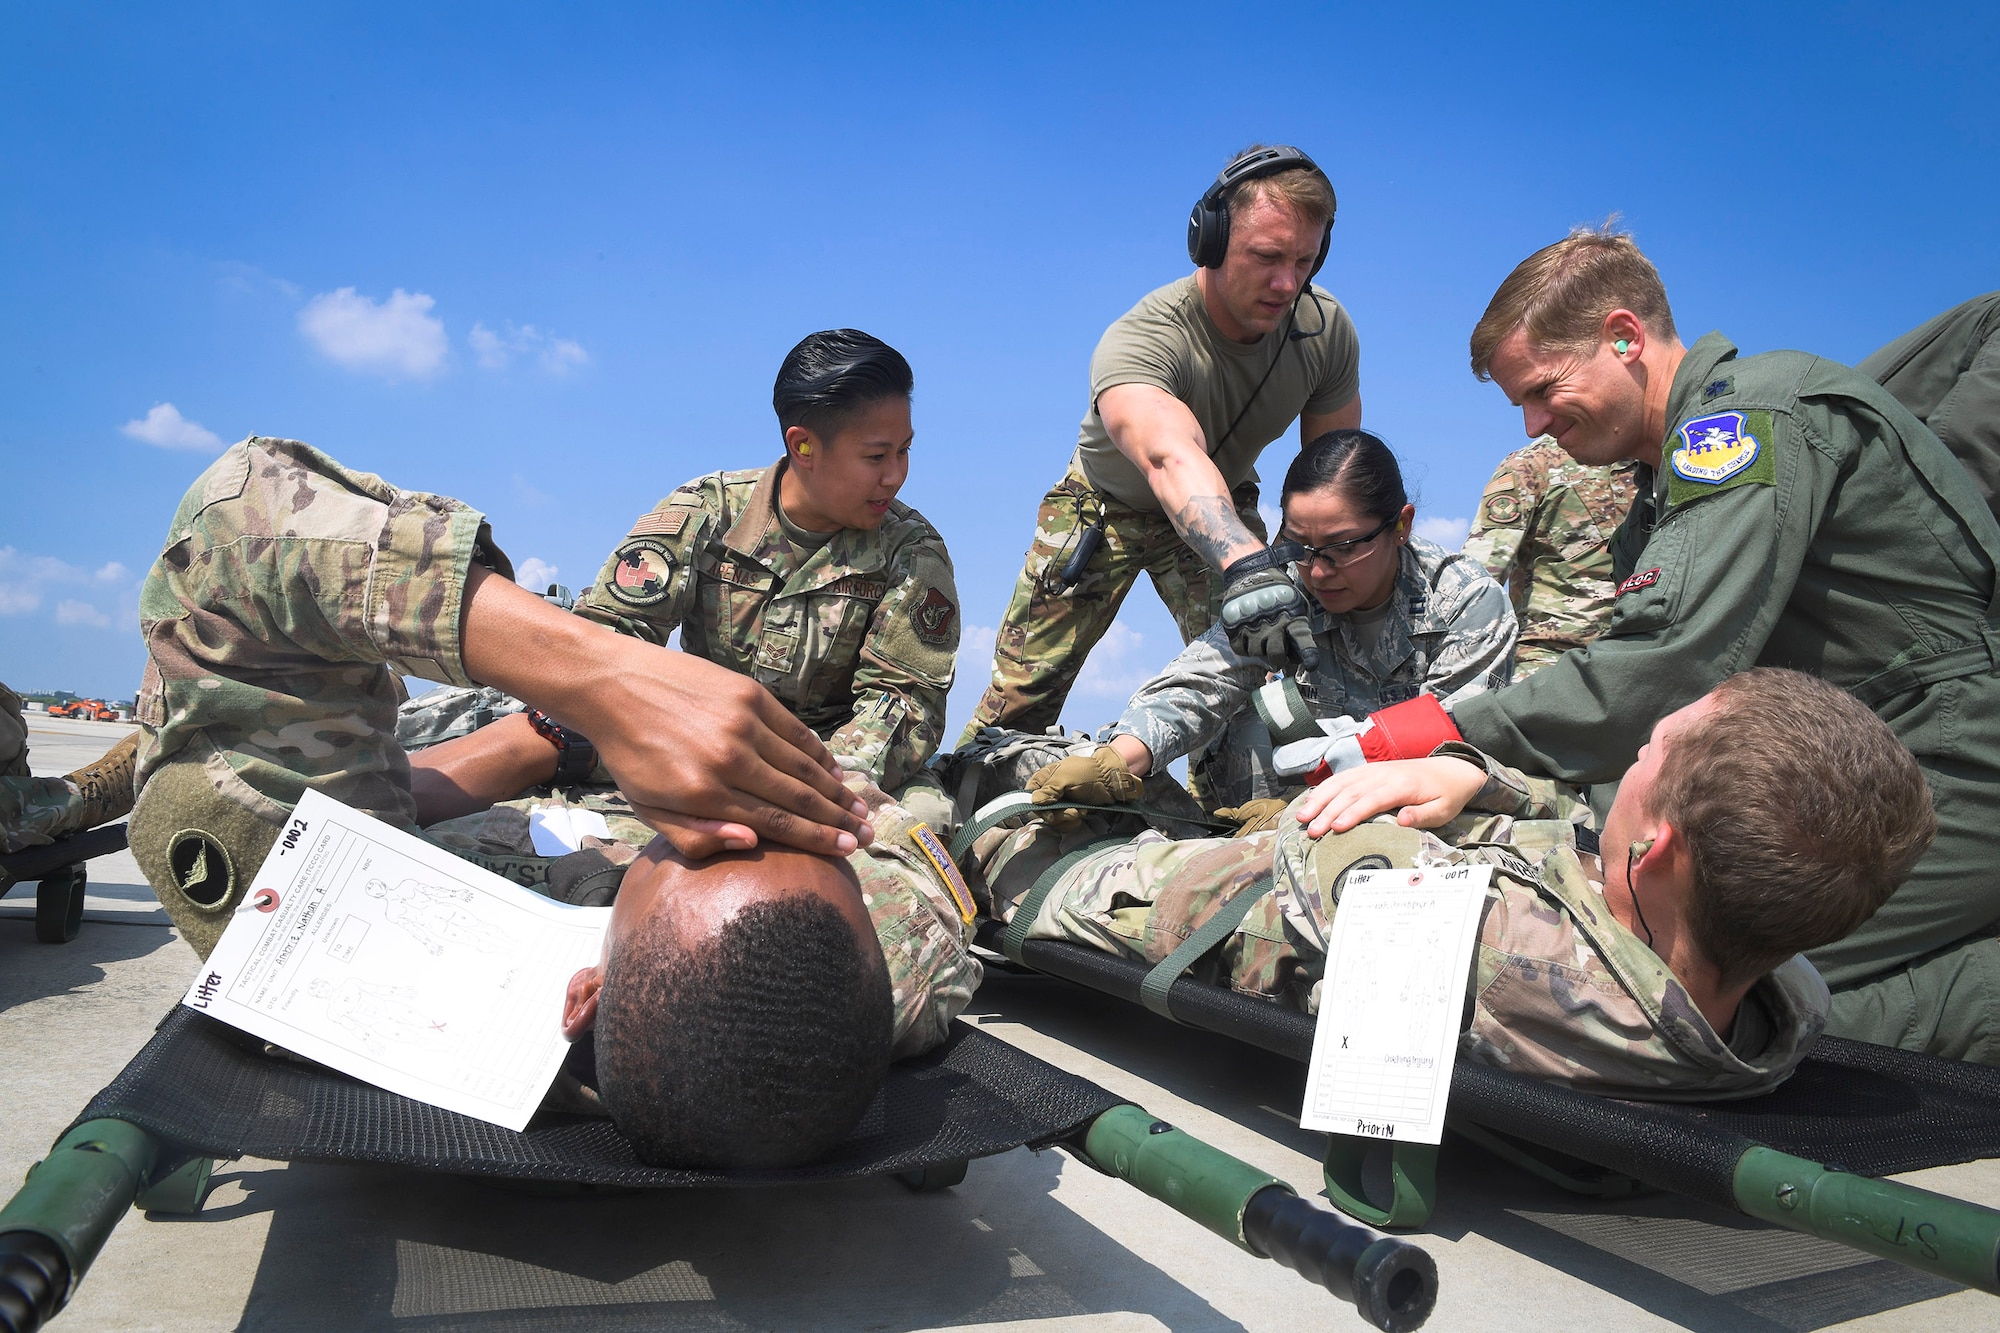 Team Osan members prepare to transport injured Army patients during Operation Ascending Eagle, Aug. 28, 2019, at Osan Air Base, Republic of Korea. Air Force and Army medics jointly operated in the simulated large casualty training to enhance their aeromedical evacuation and patient transportation procedures. (U.S. Air Force photo by Staff Sgt. Greg Nash)